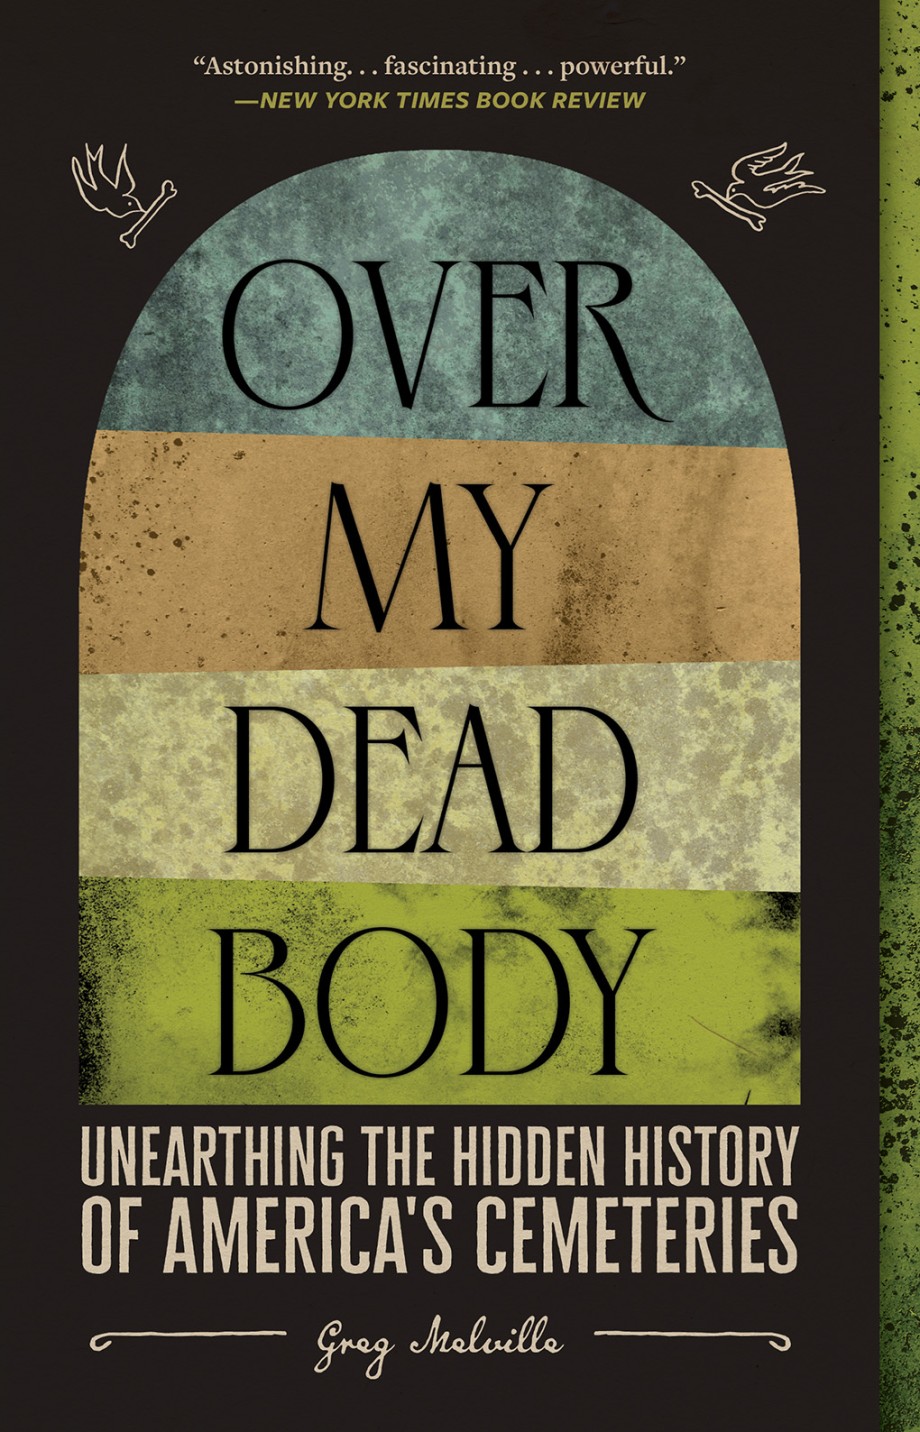 Over My Dead Body Unearthing the Hidden History of America's Cemeteries